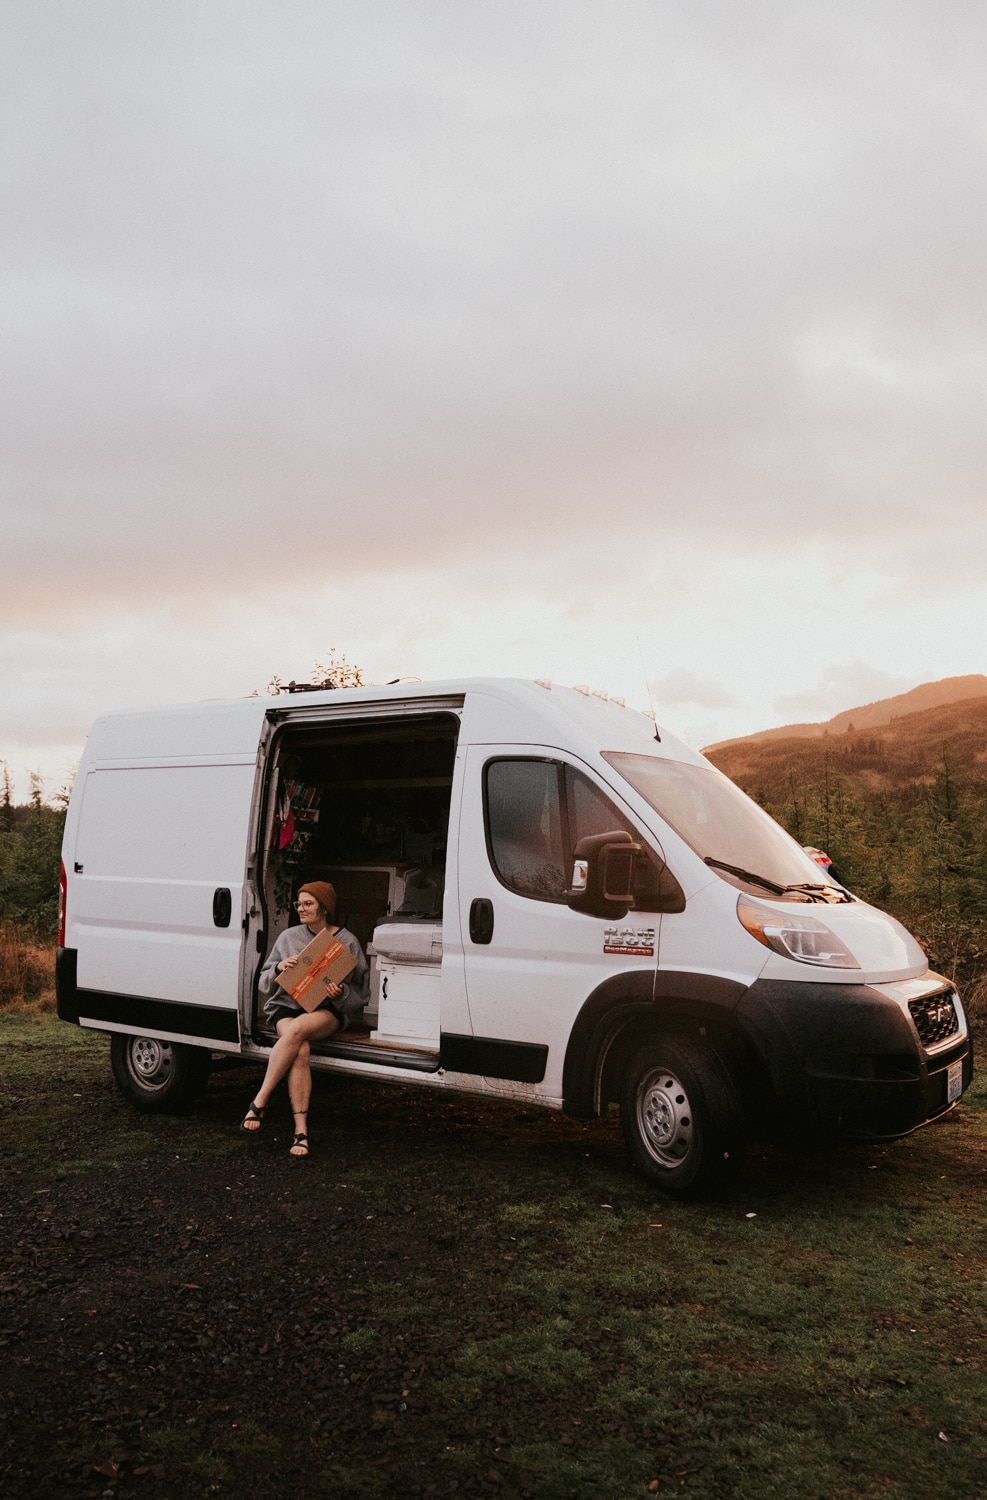 How to Get Mail on the Road & Establish Residency for Van Life